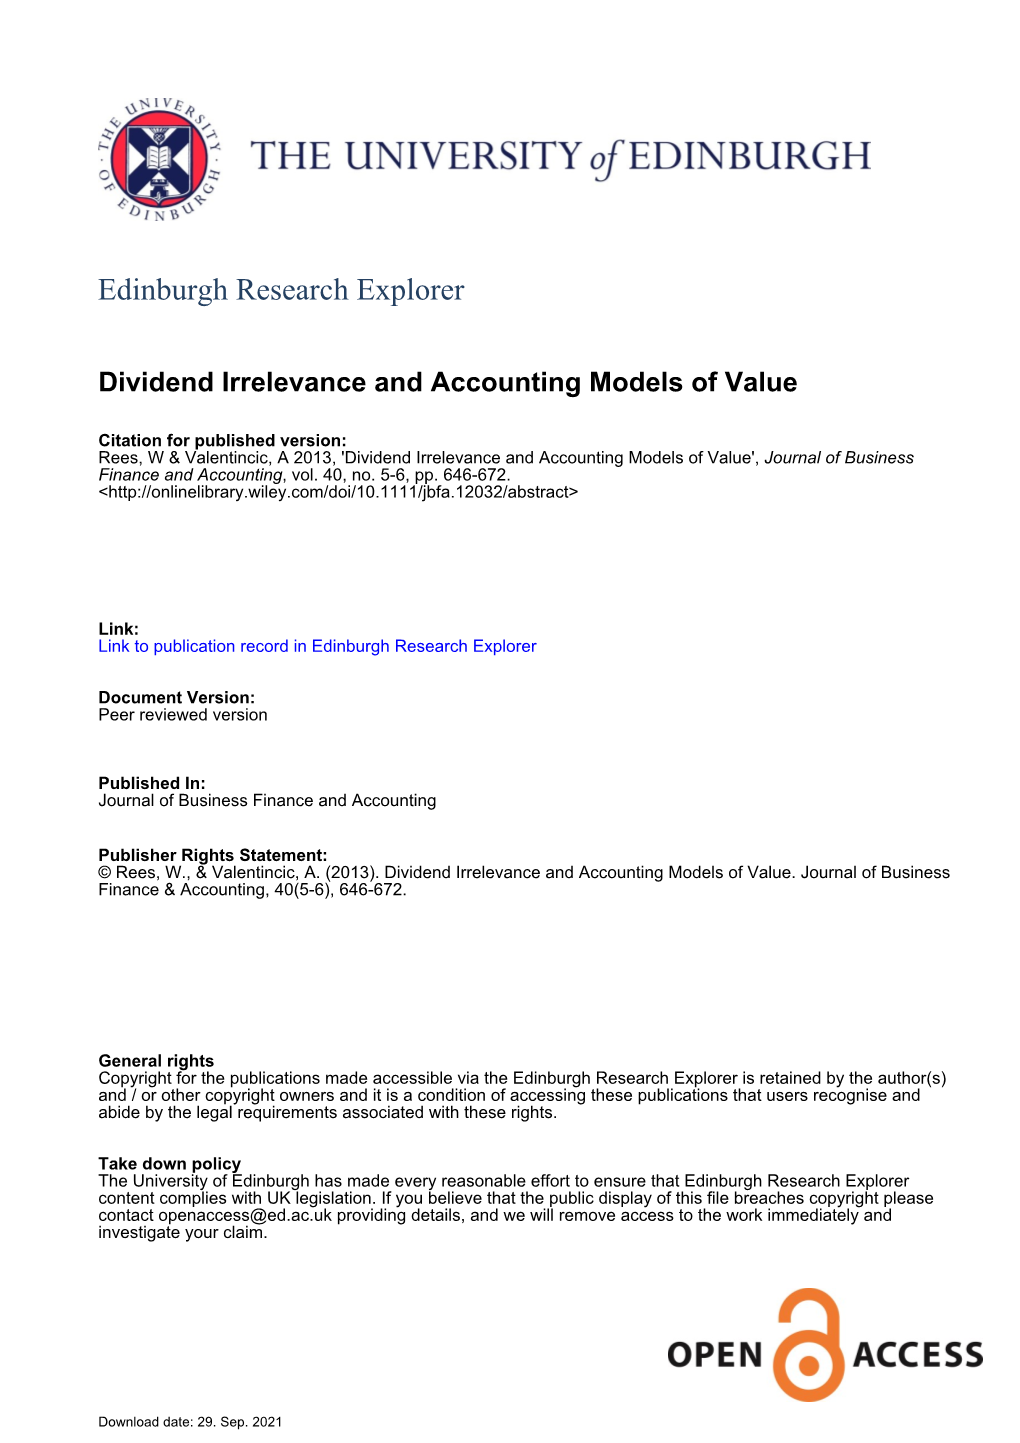 Dividend Irrelevance and Accounting Models of Value